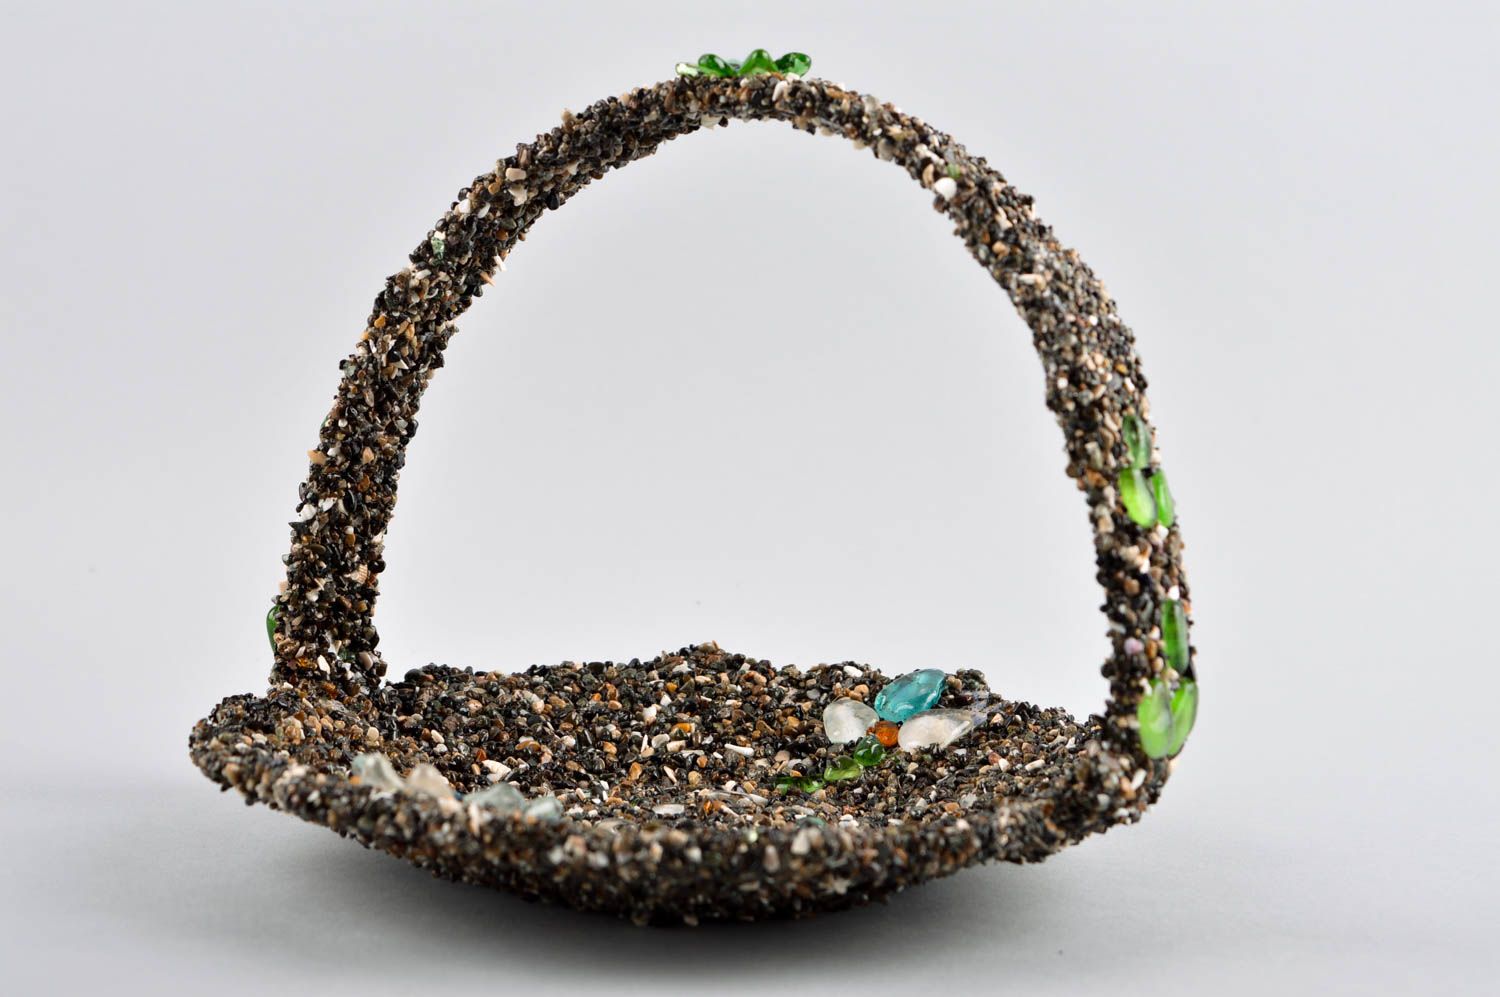 8 inches ceramic bowl basket for sweets made of cardboard and decorated with sea stones photo 1